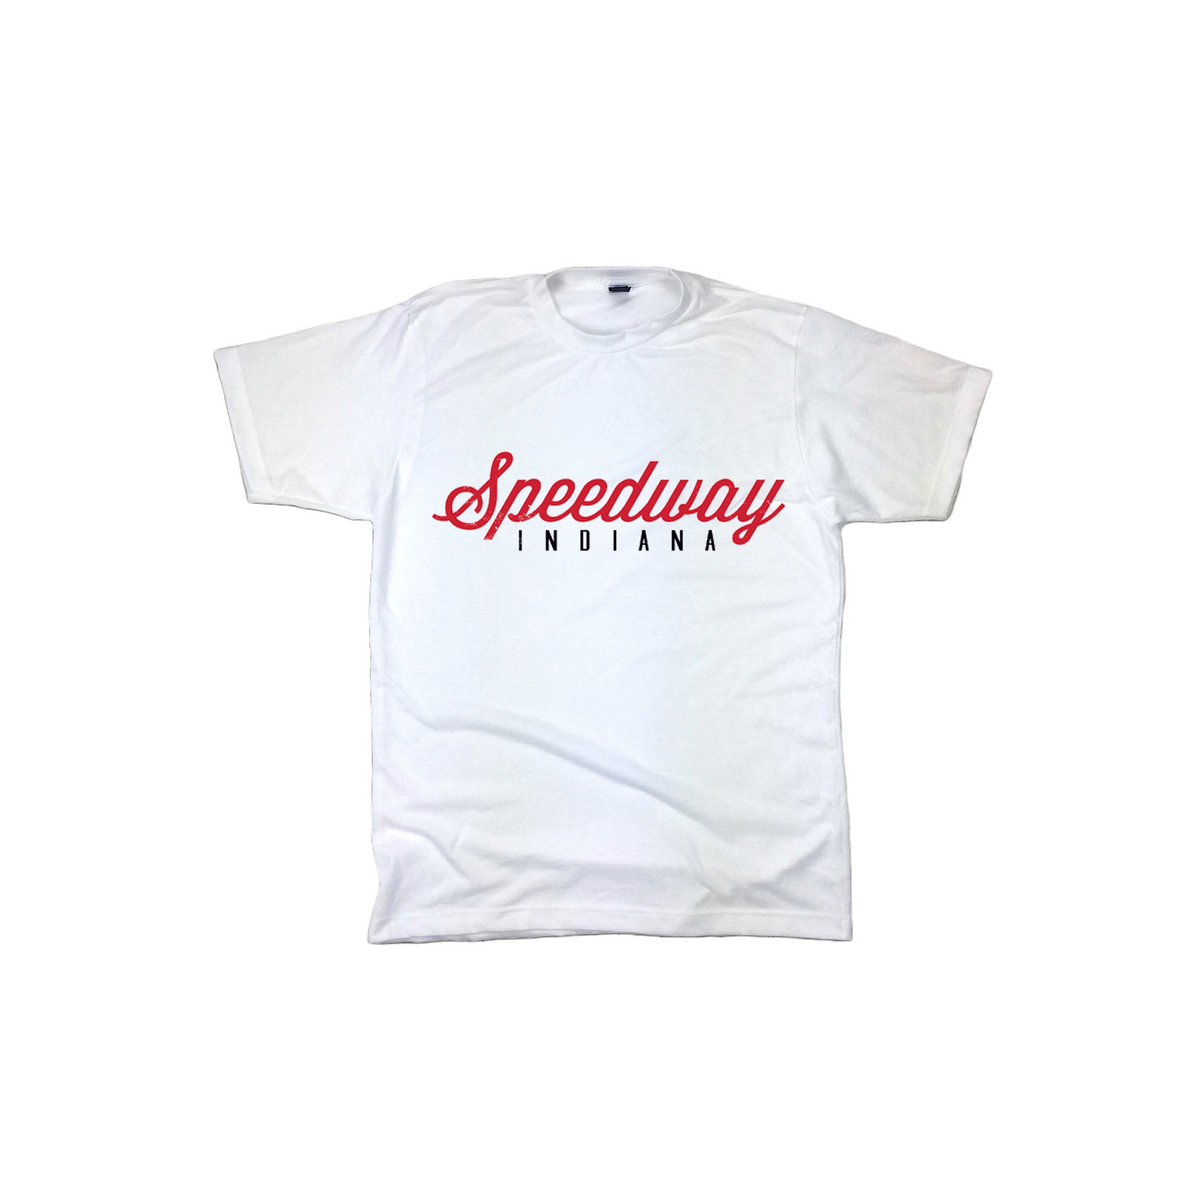 Speedway Indiana - Youth Tee